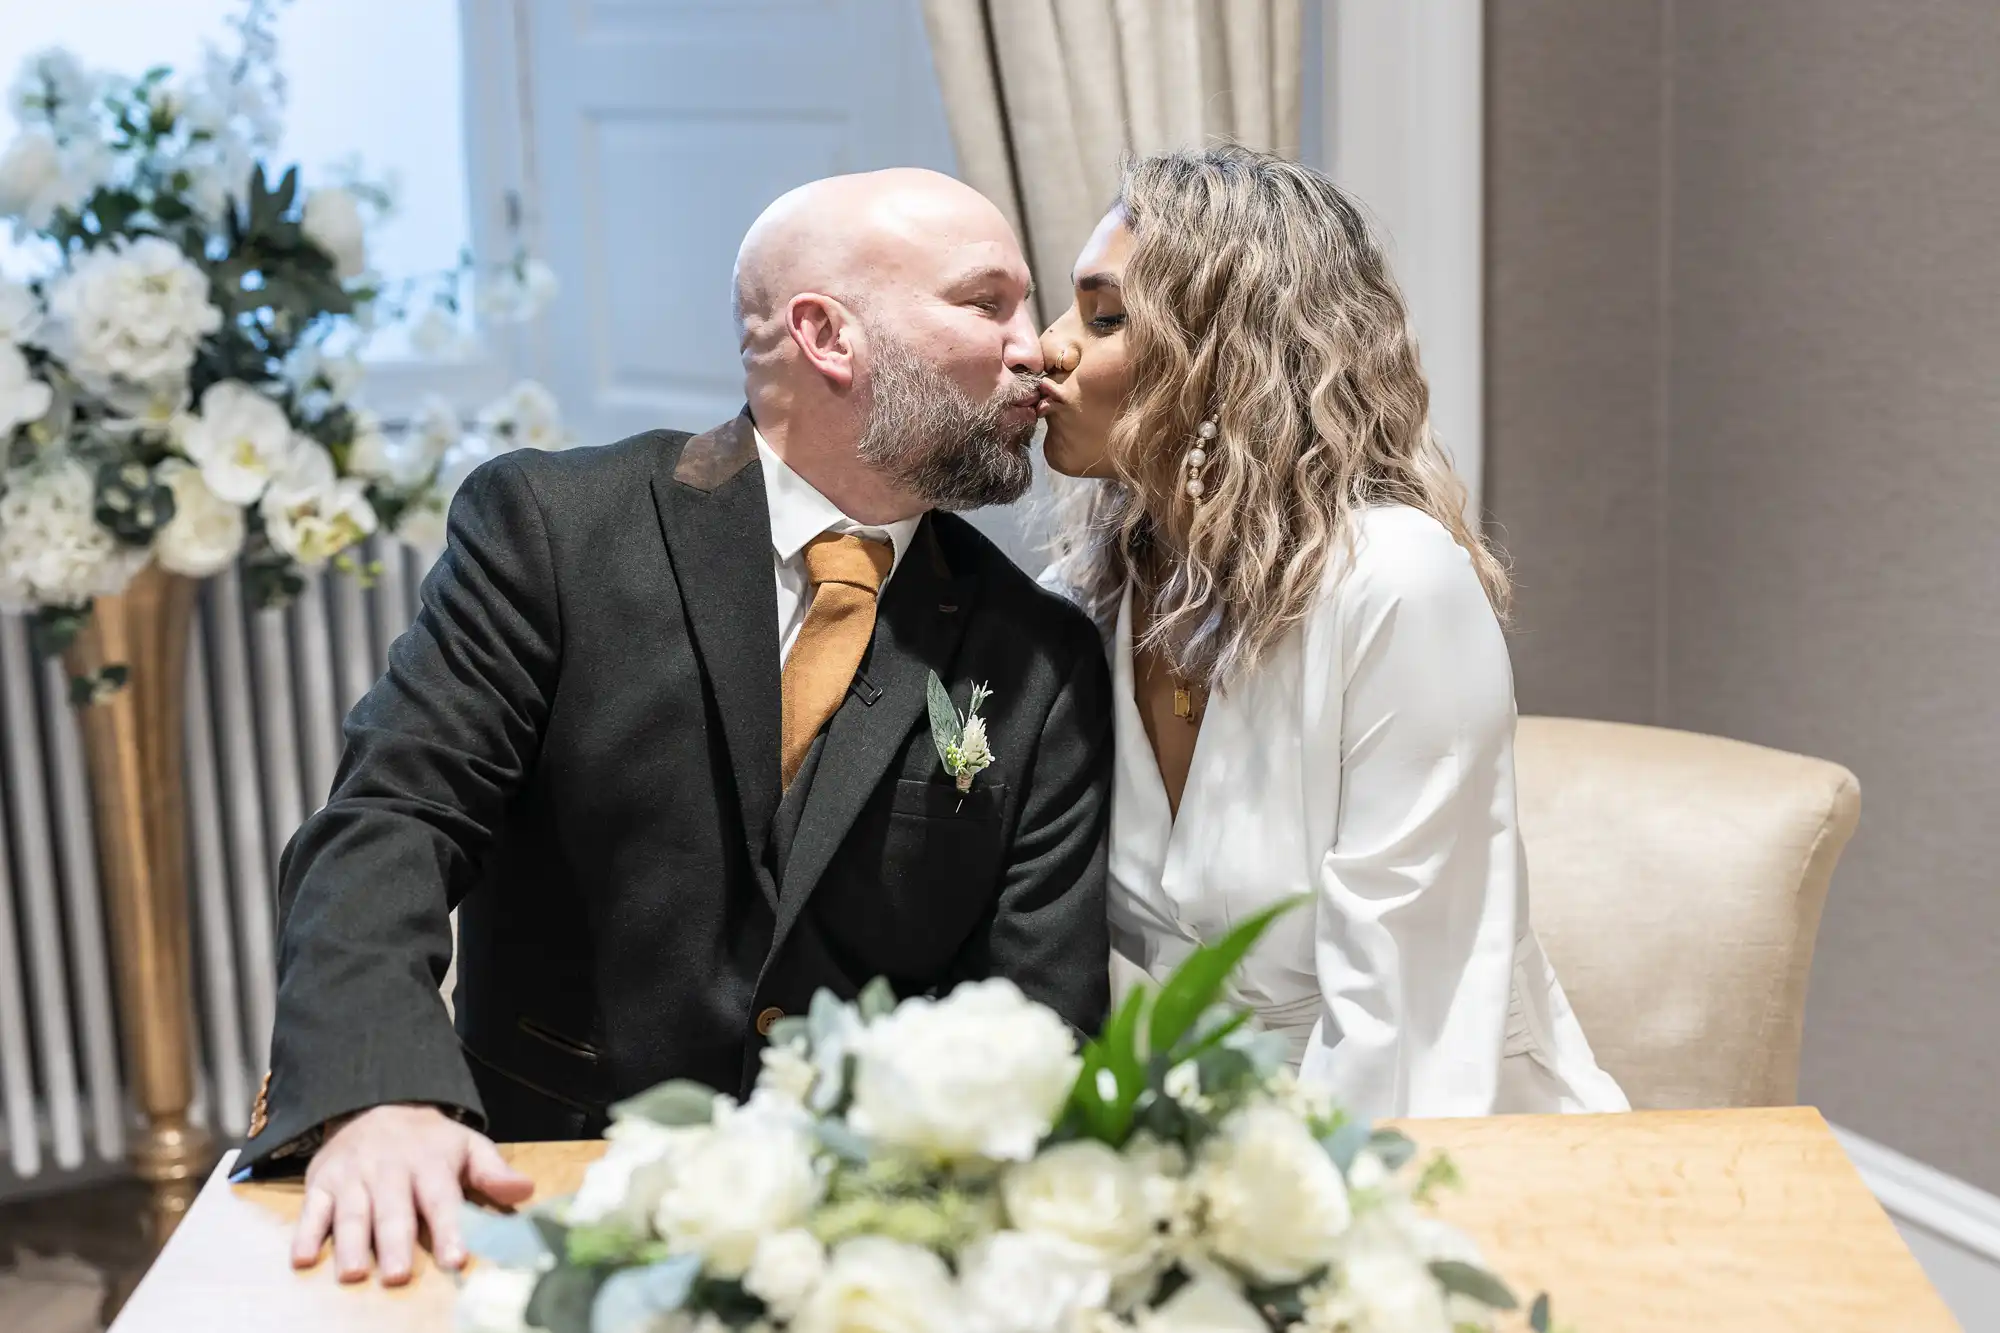 A bride and groom kiss while seated at a table with white floral arrangements.